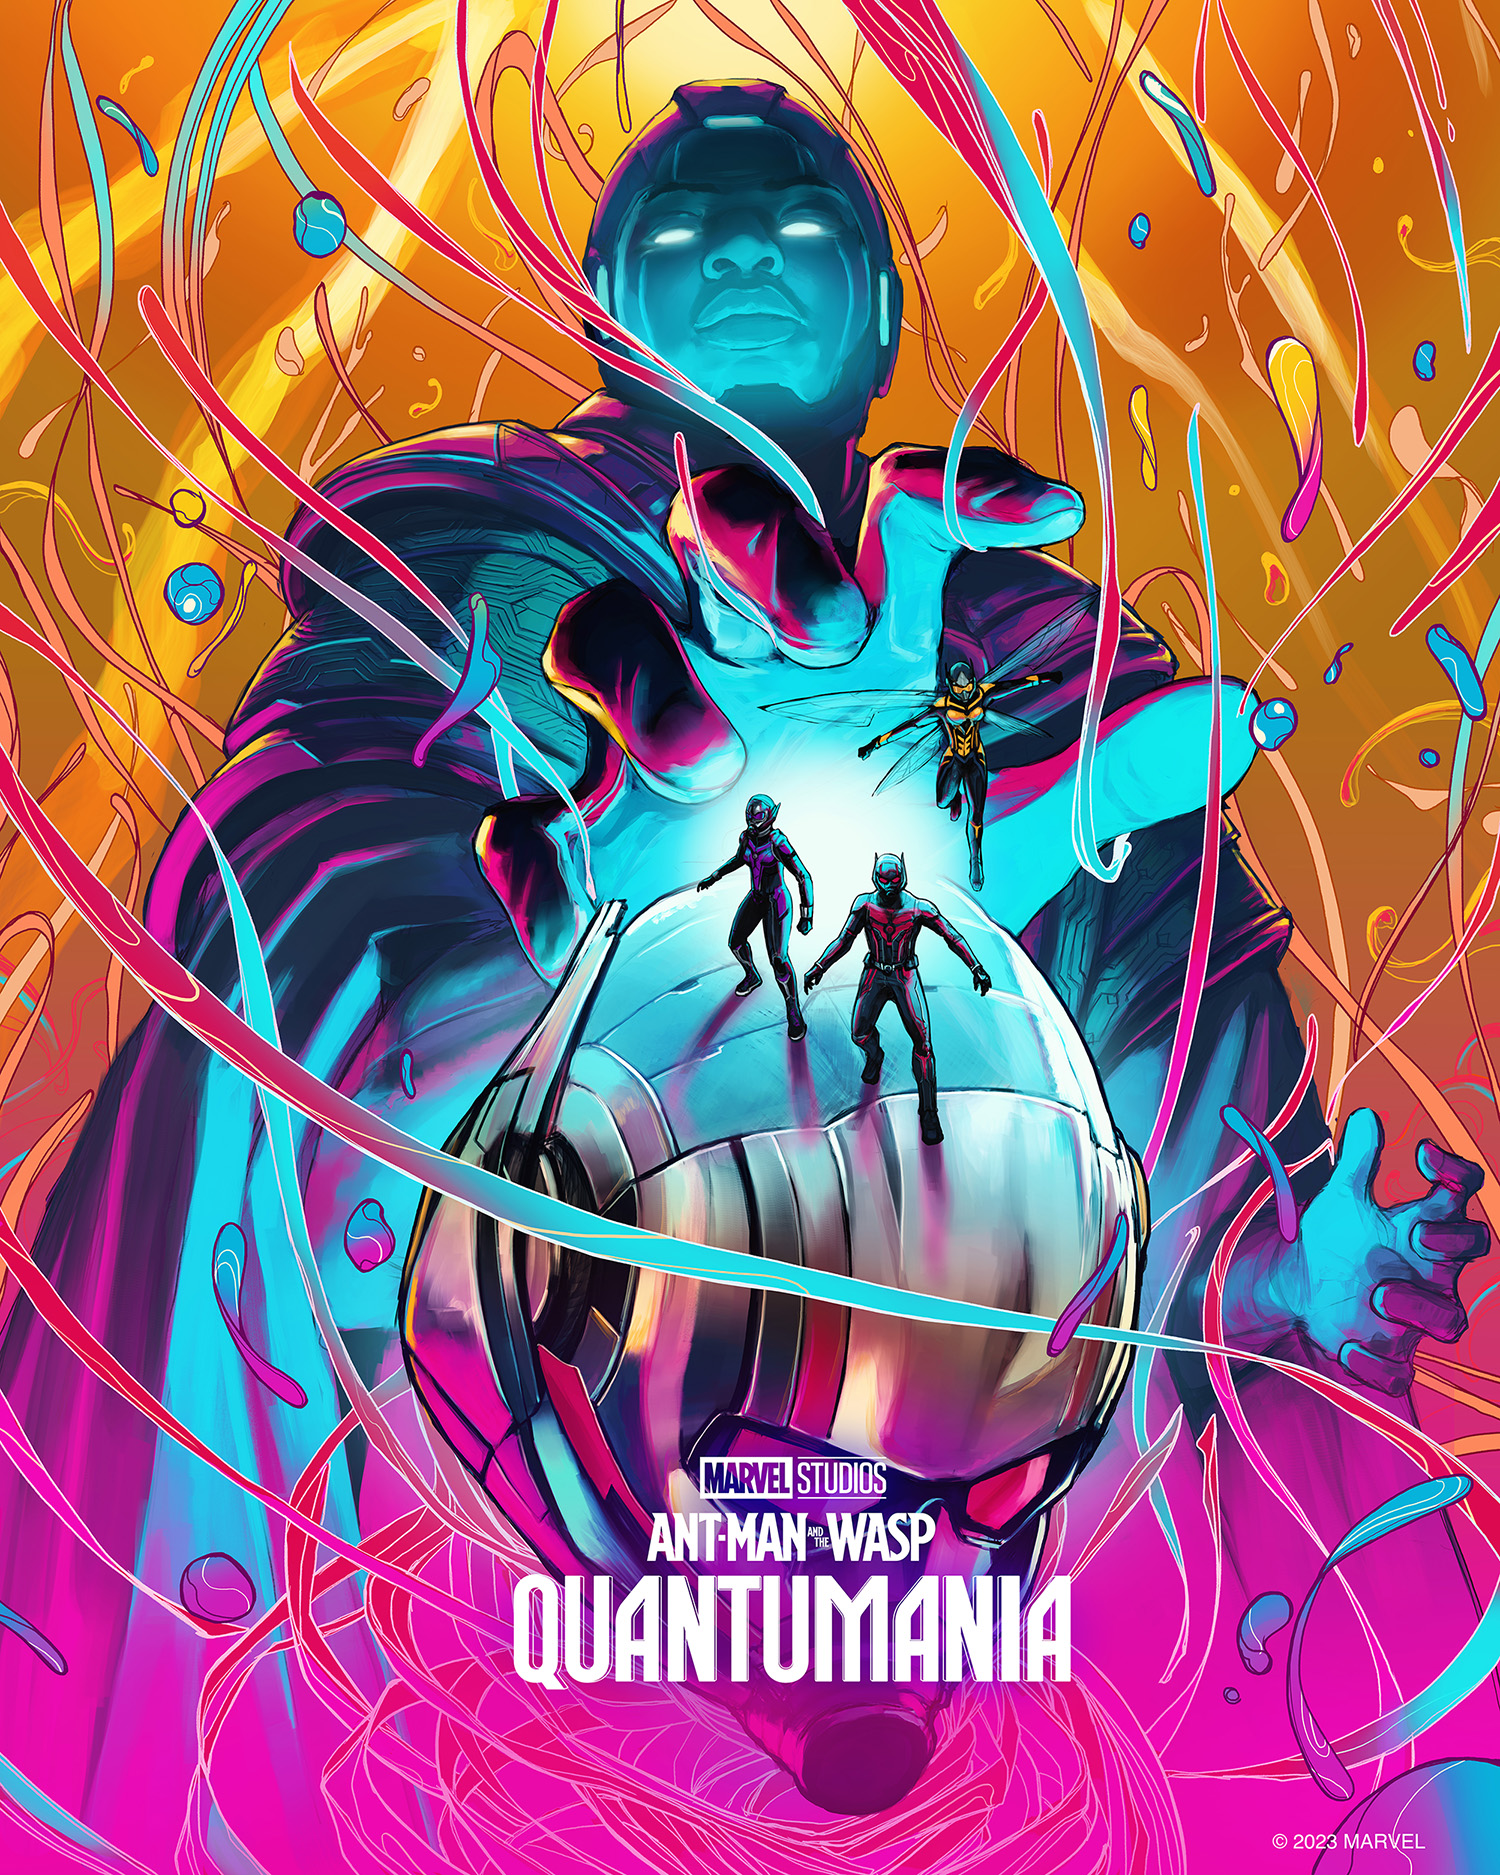 Artwork by Ant-Man & The Wasp: Quantumania